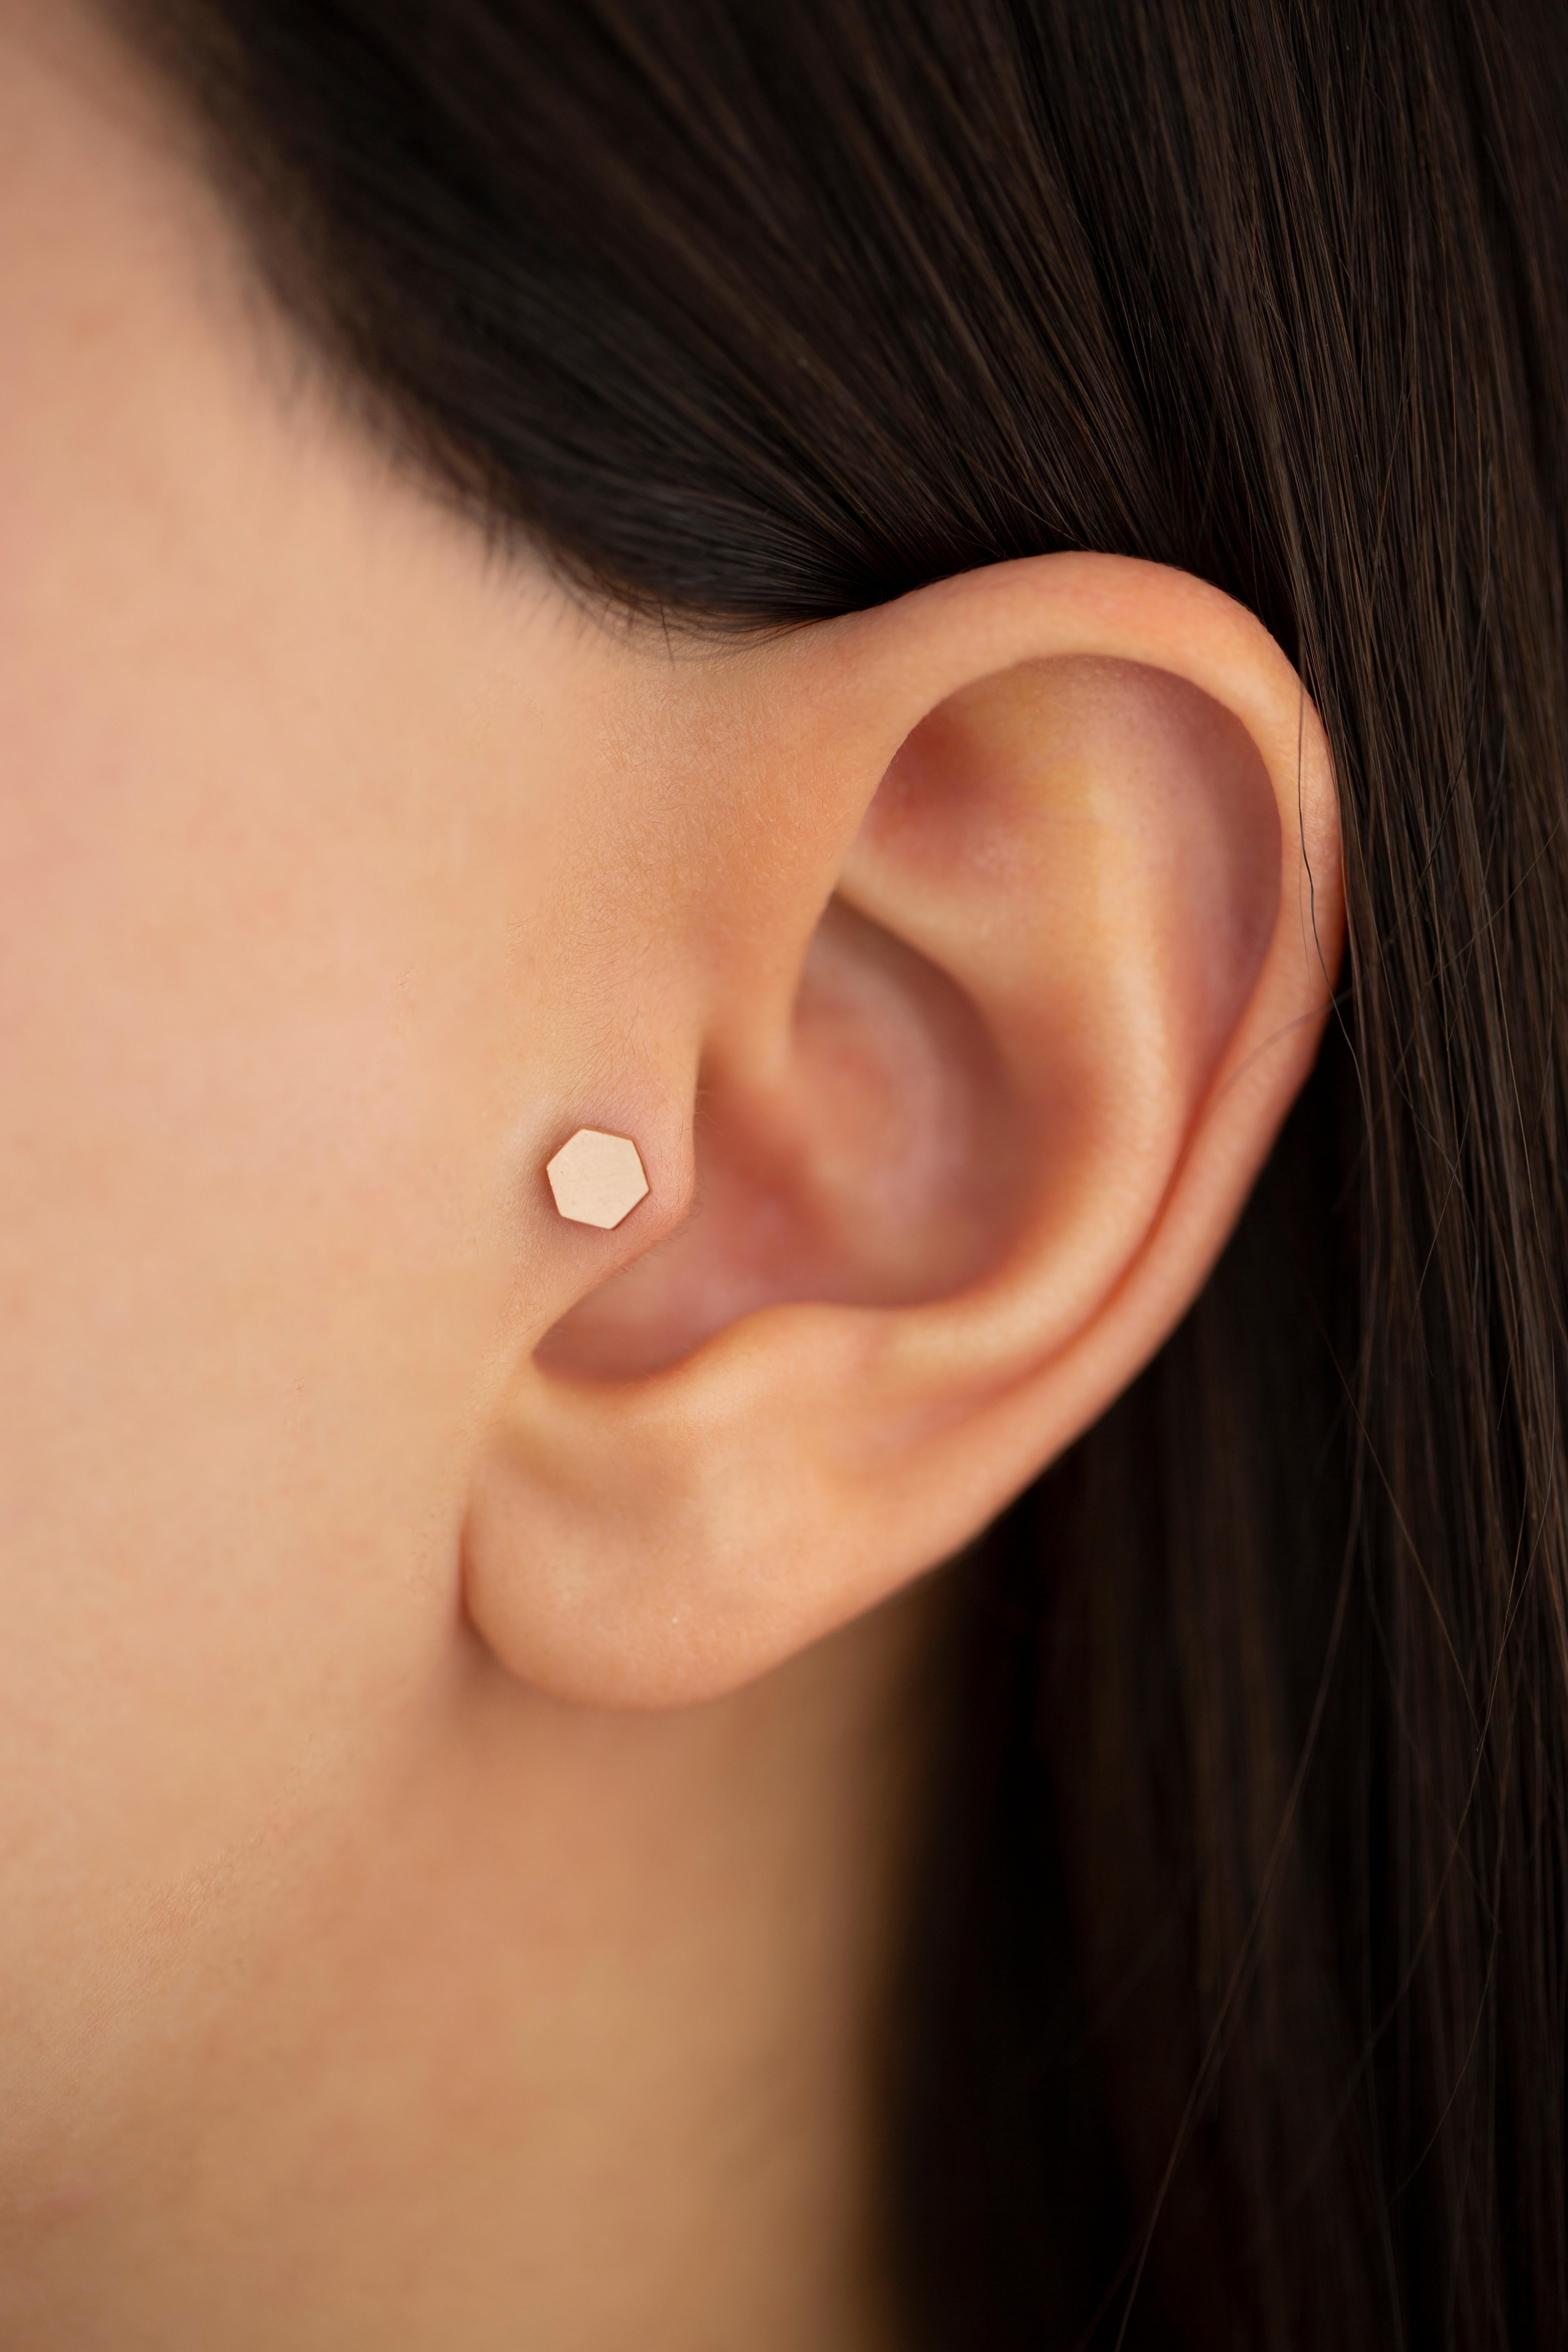 14K Rose Gold Hexagon Shape Piercing, Rose Gold Stud Hexagonal Earring

You can use the piercing as an earring too! Also this piercing is suitable for tragus, nose, helix, lobe, flat, medusa, monreo, labret and stud.

This piercing was made with